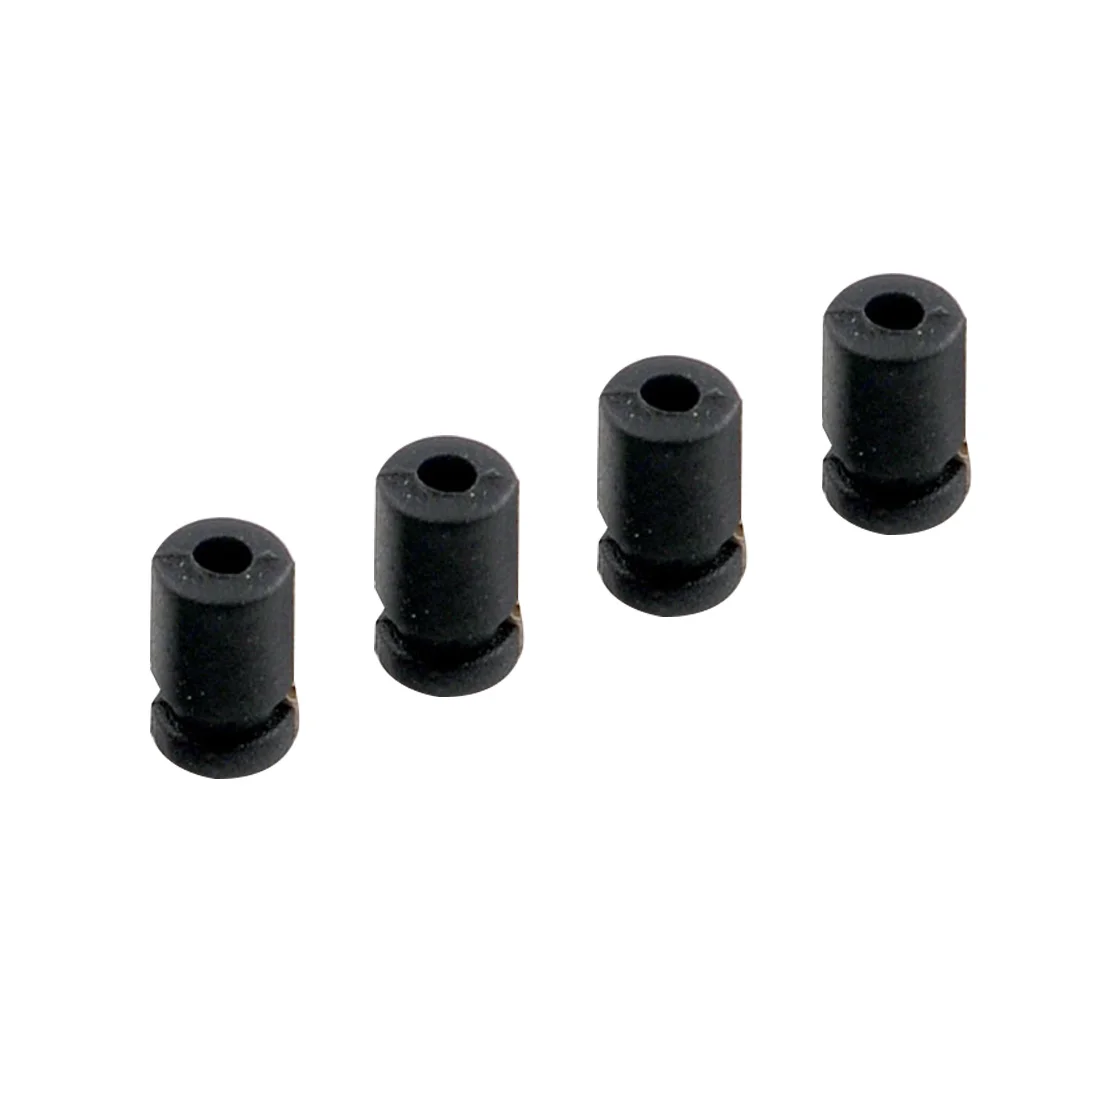 FEICHAO RC Drone Quadcopter Spare Parts Rubber Dampeners Shock-Absorbing Ball for Mobula6 HD FPV Racing Drone